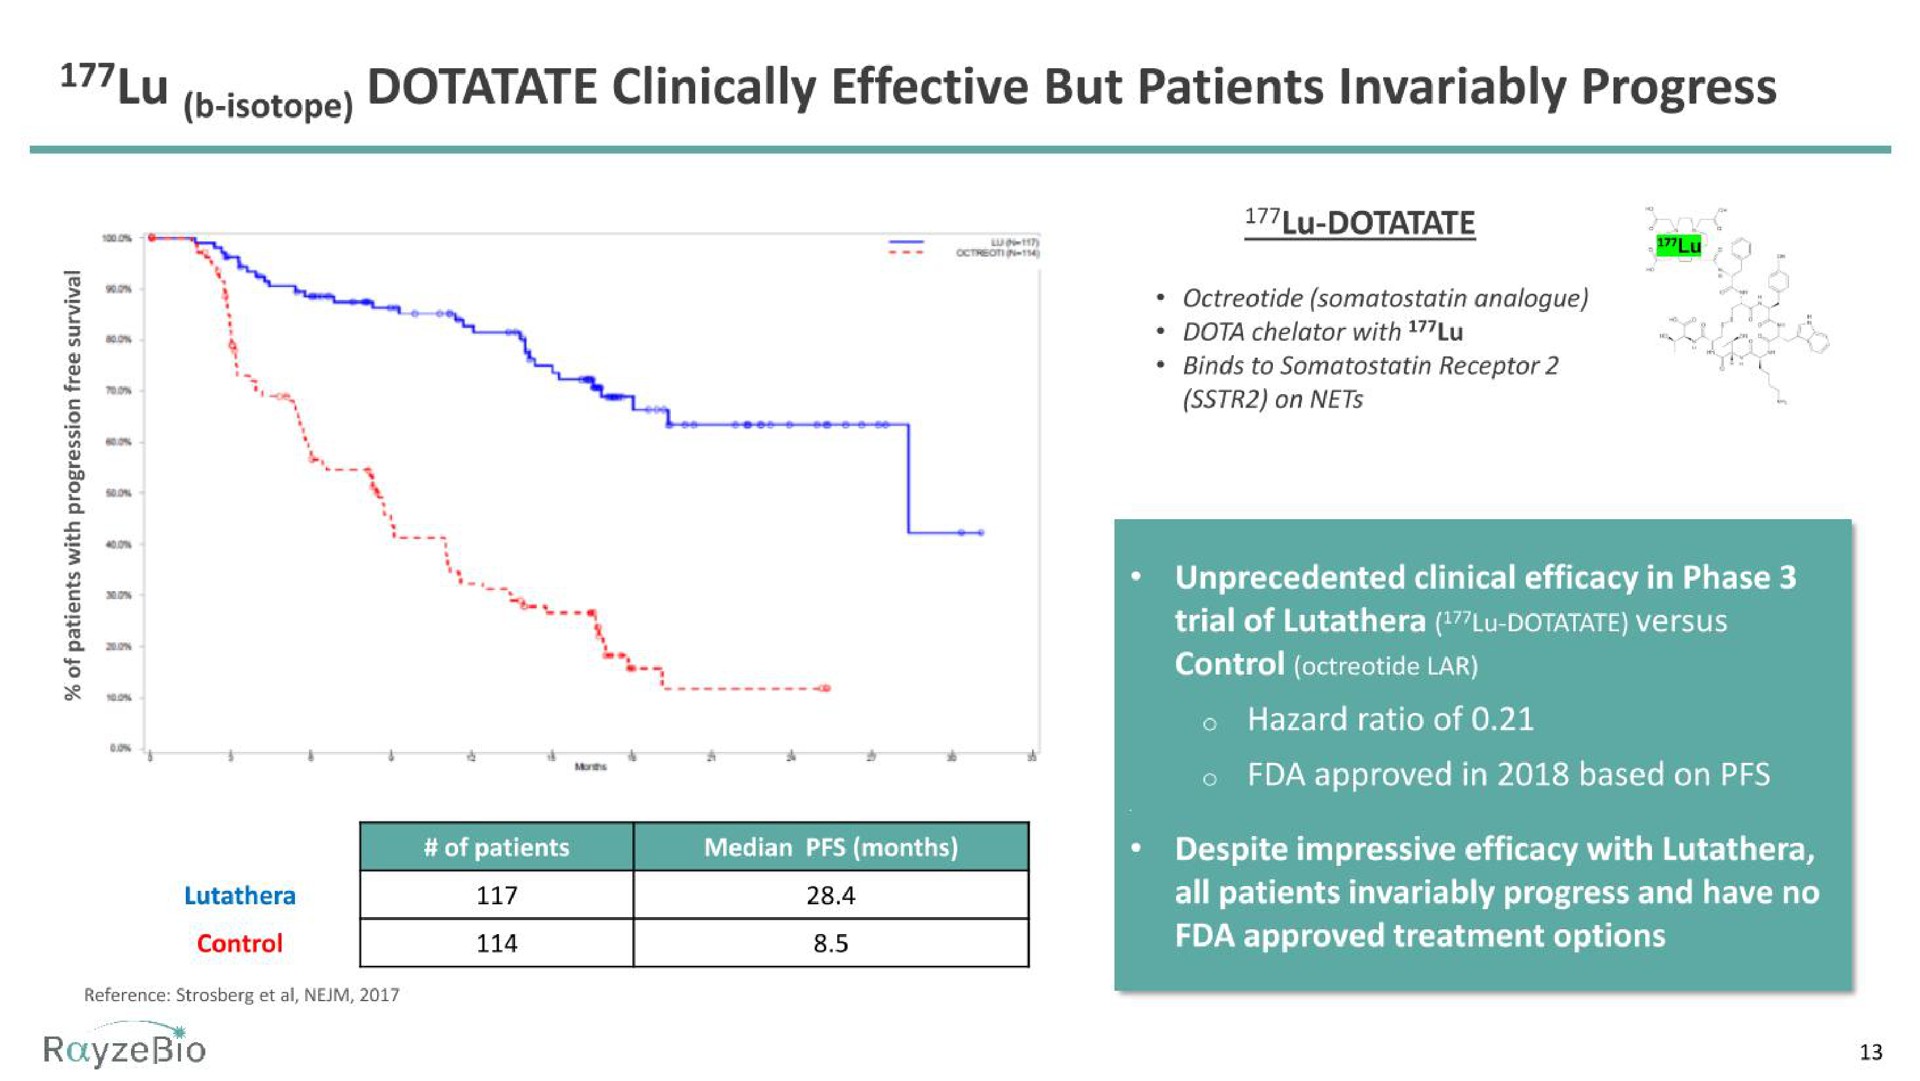 isotope clinically effective but patients invariably progress | RayzeBio